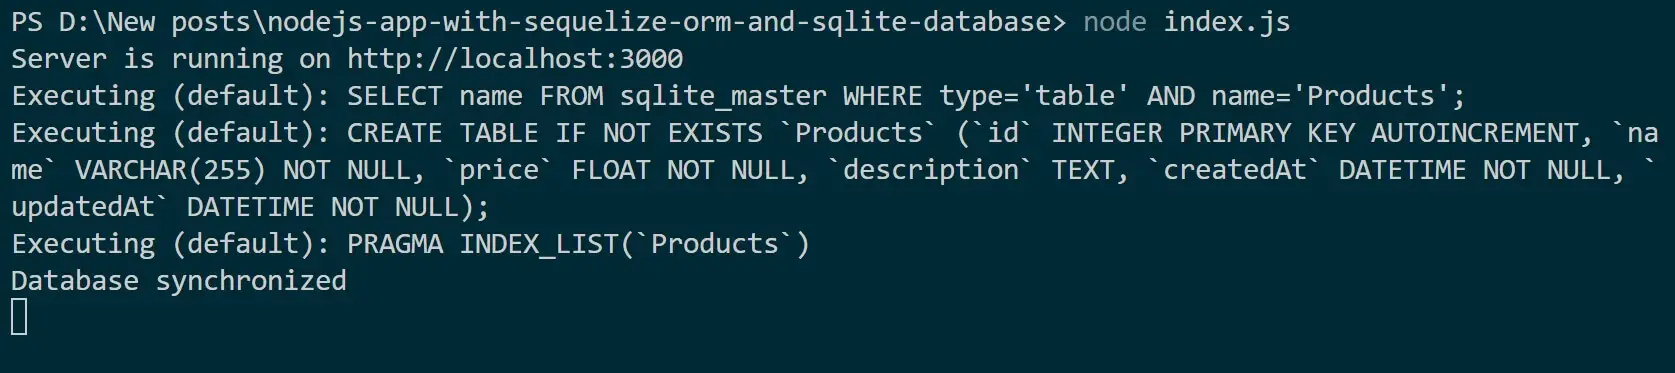 Create Node.js App with Sequelize ORM and SQLite Database